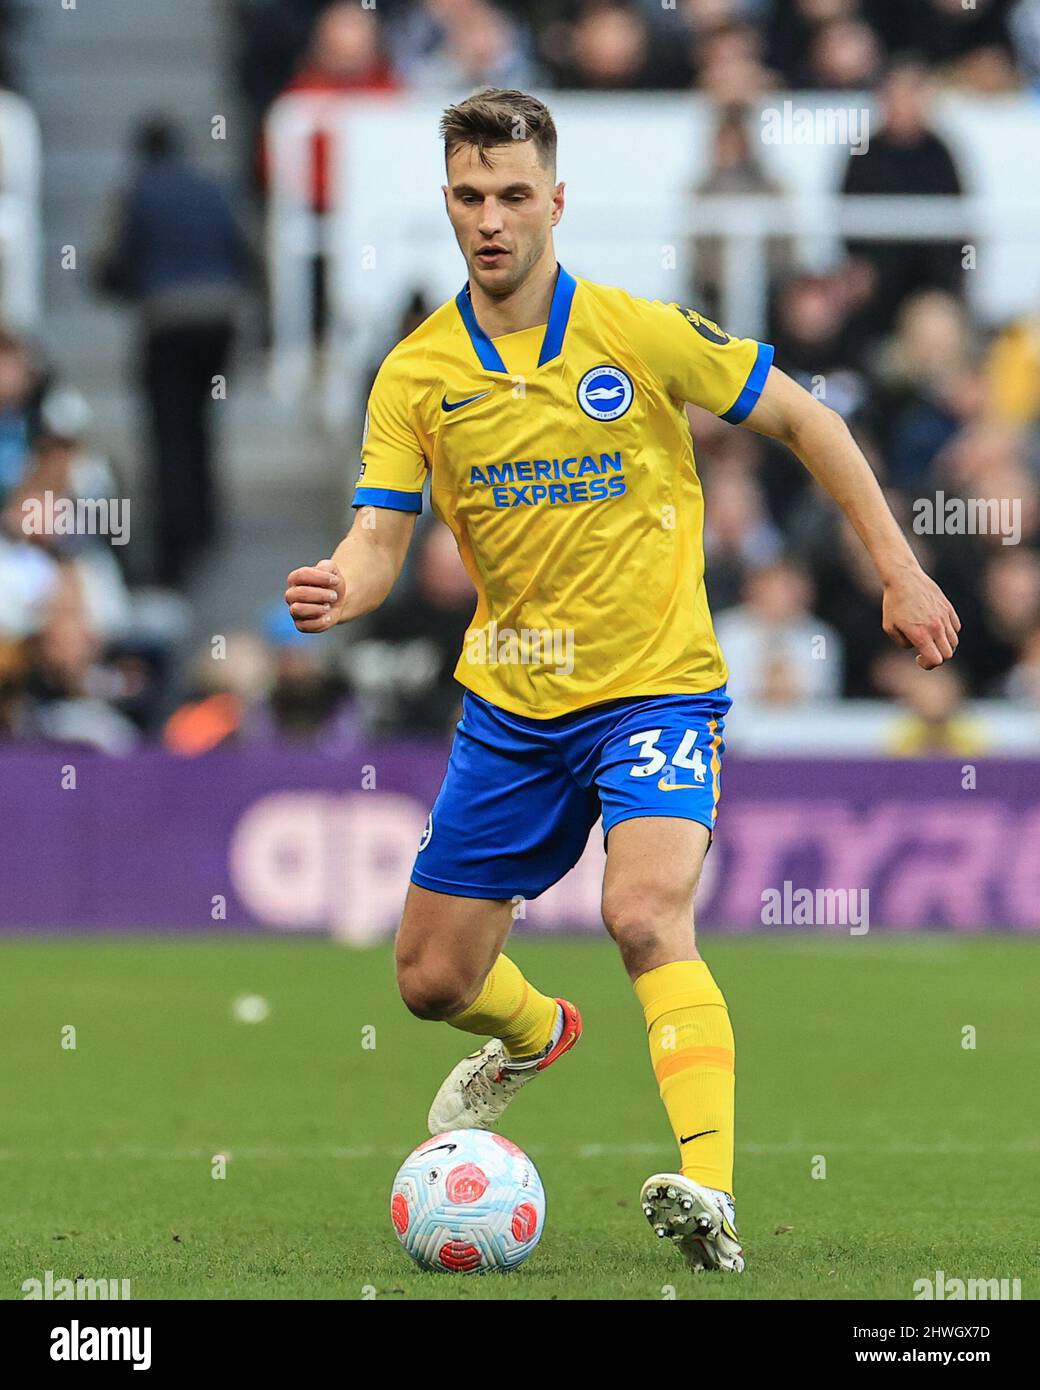 Joël Veltman #34 of Brighton & Hove Albion during the game Stock Photo